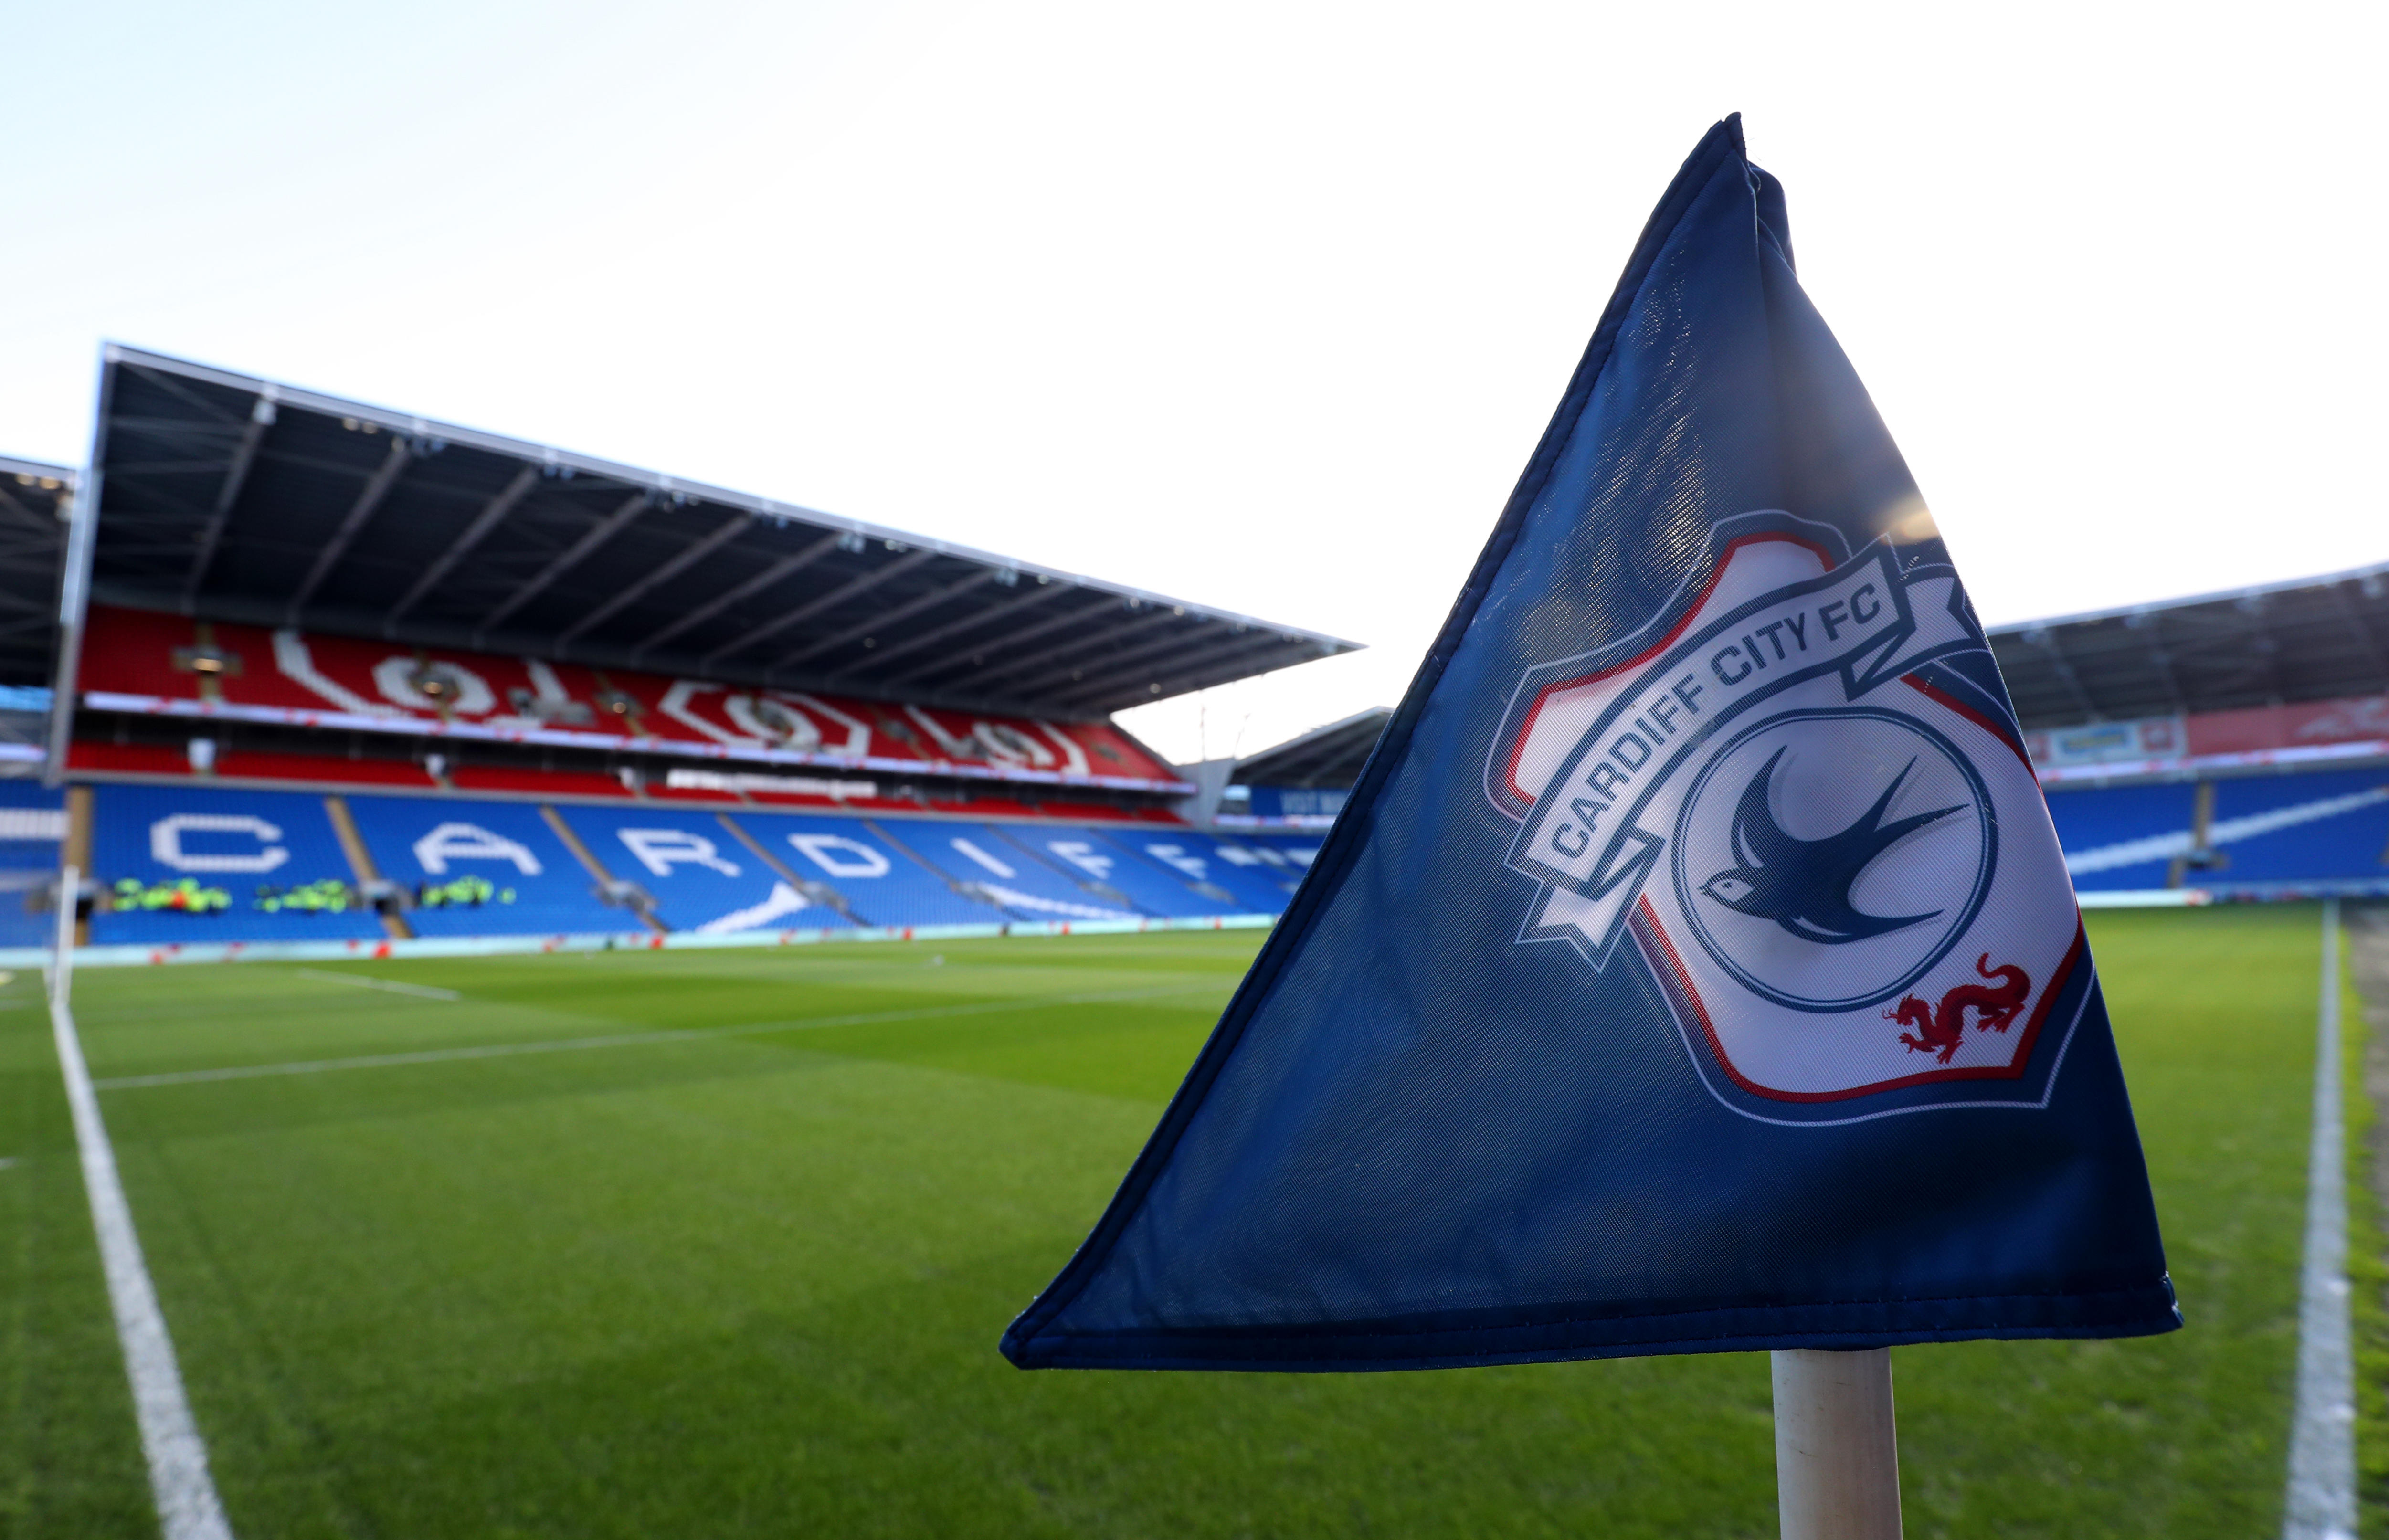 Cardiff City vs Rotherham United» Predictions, Odds, Live Score & Stats